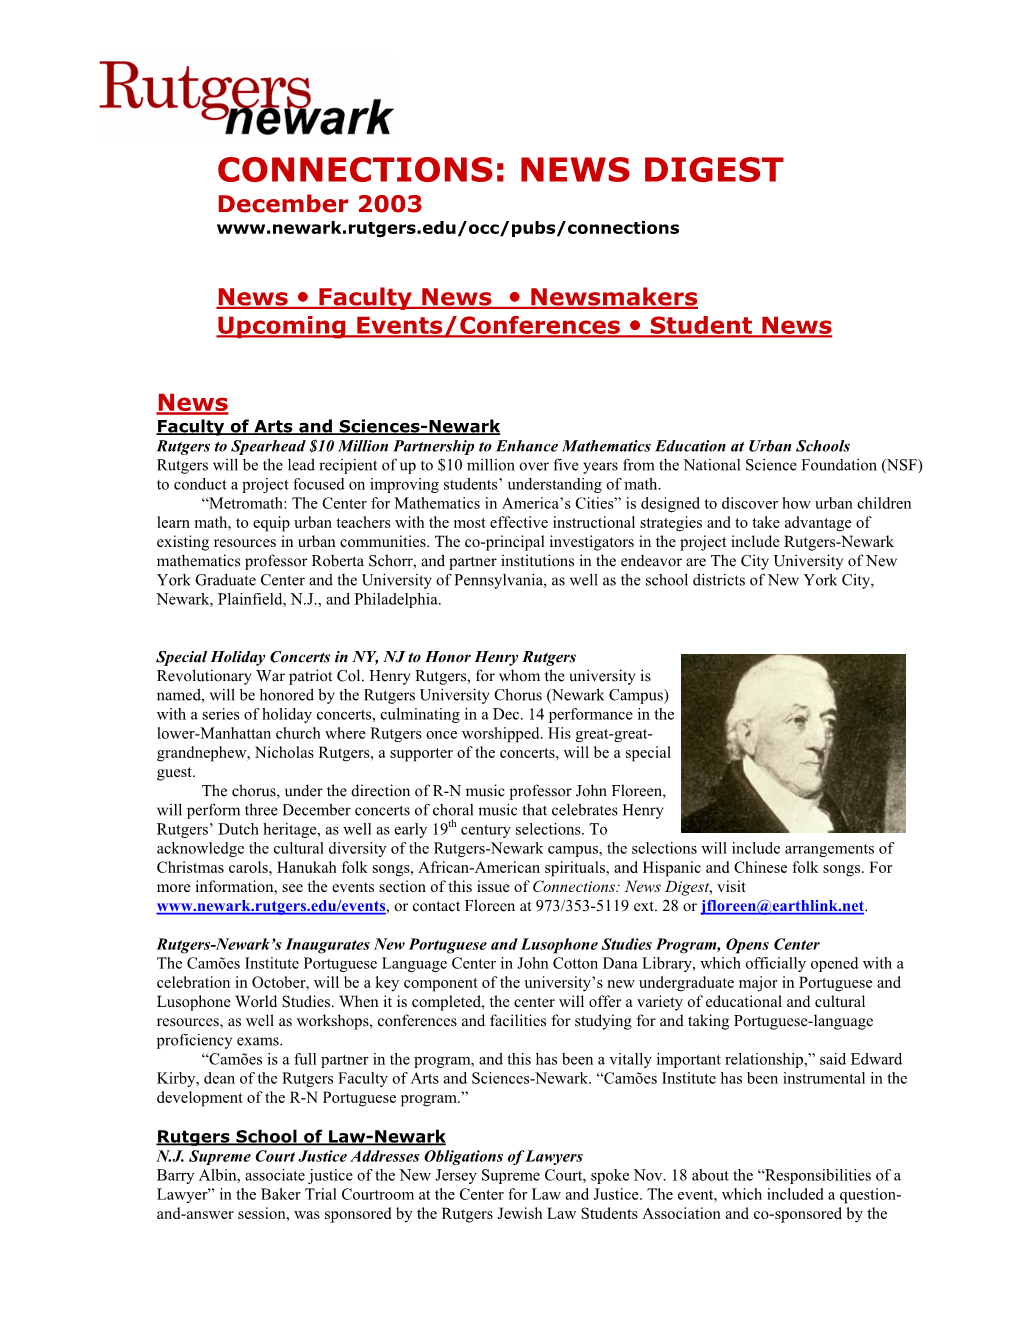 CONNECTIONS: NEWS DIGEST December 2003